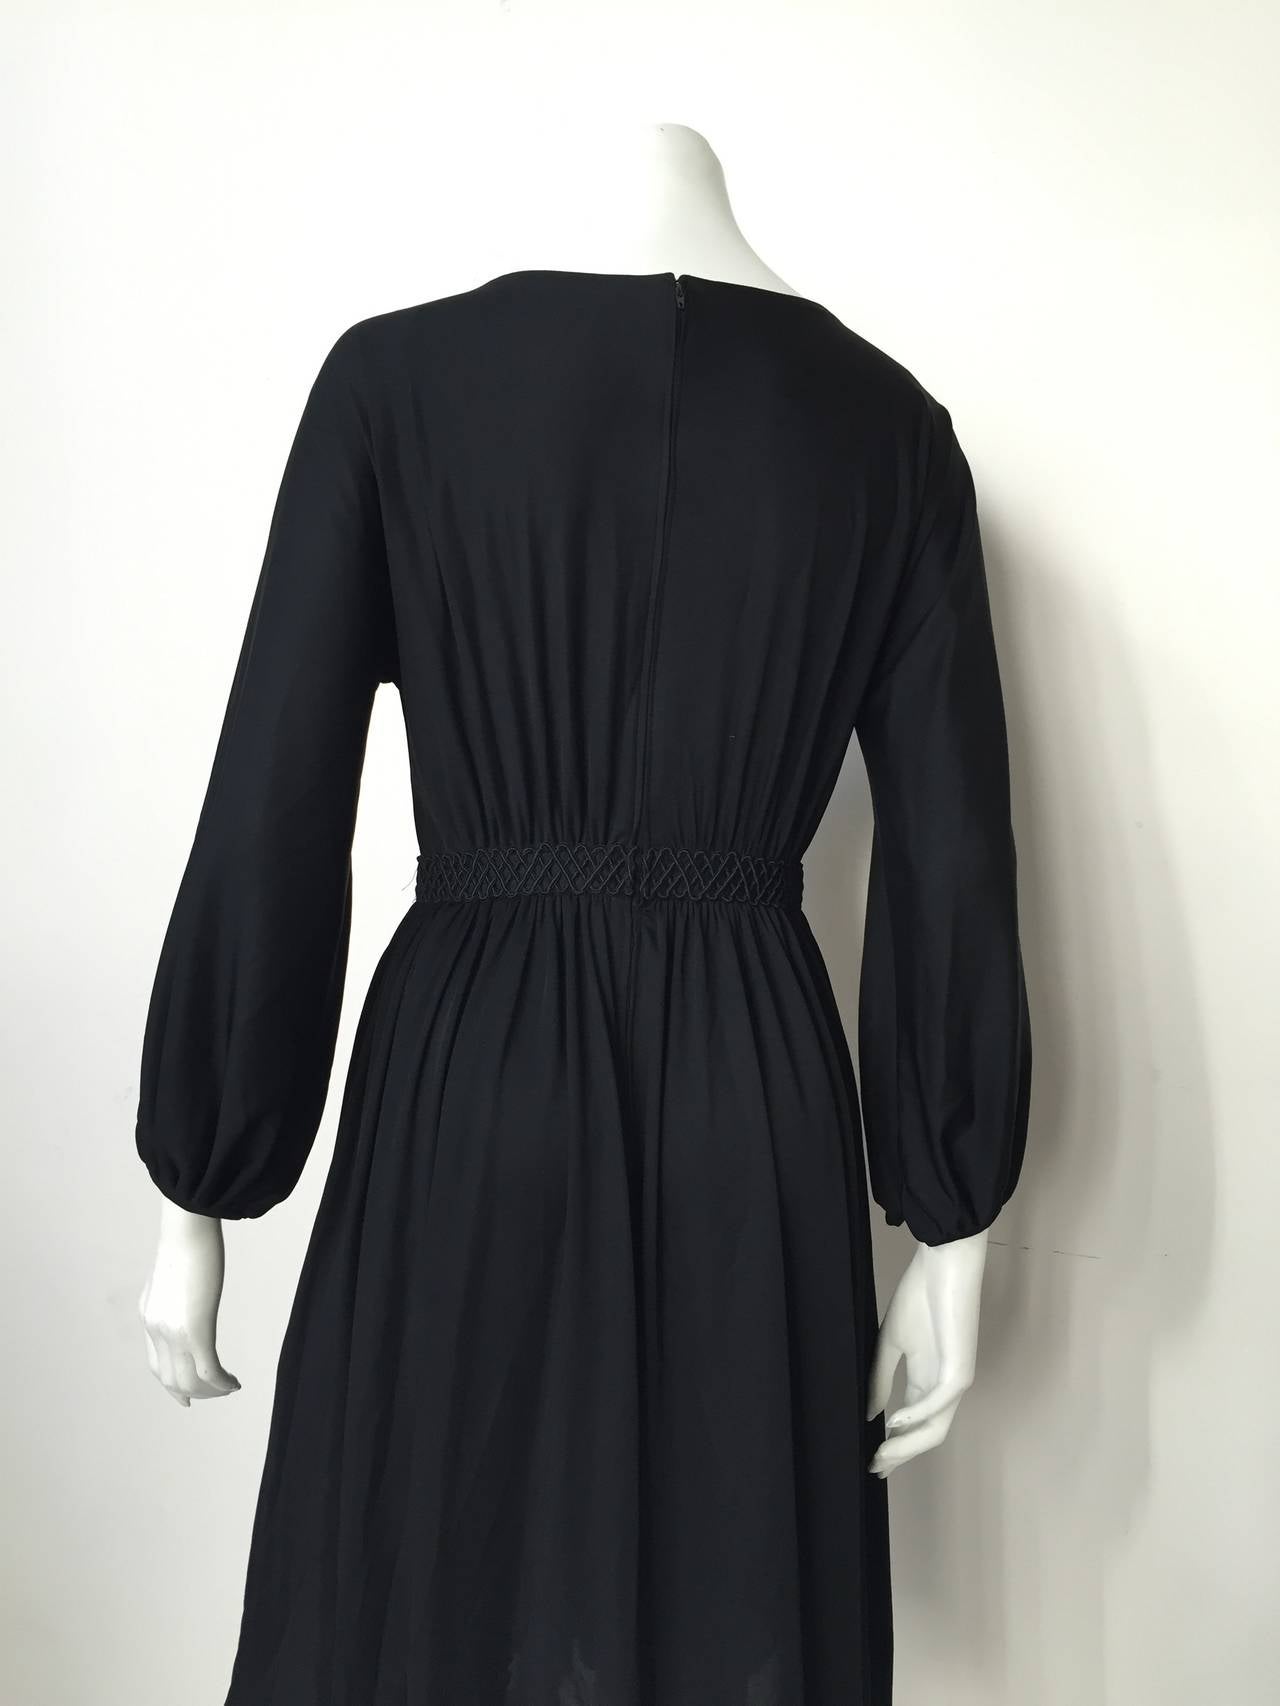 Donald Brooks 70s Black Dress with Pockets Size 6. For Sale 2